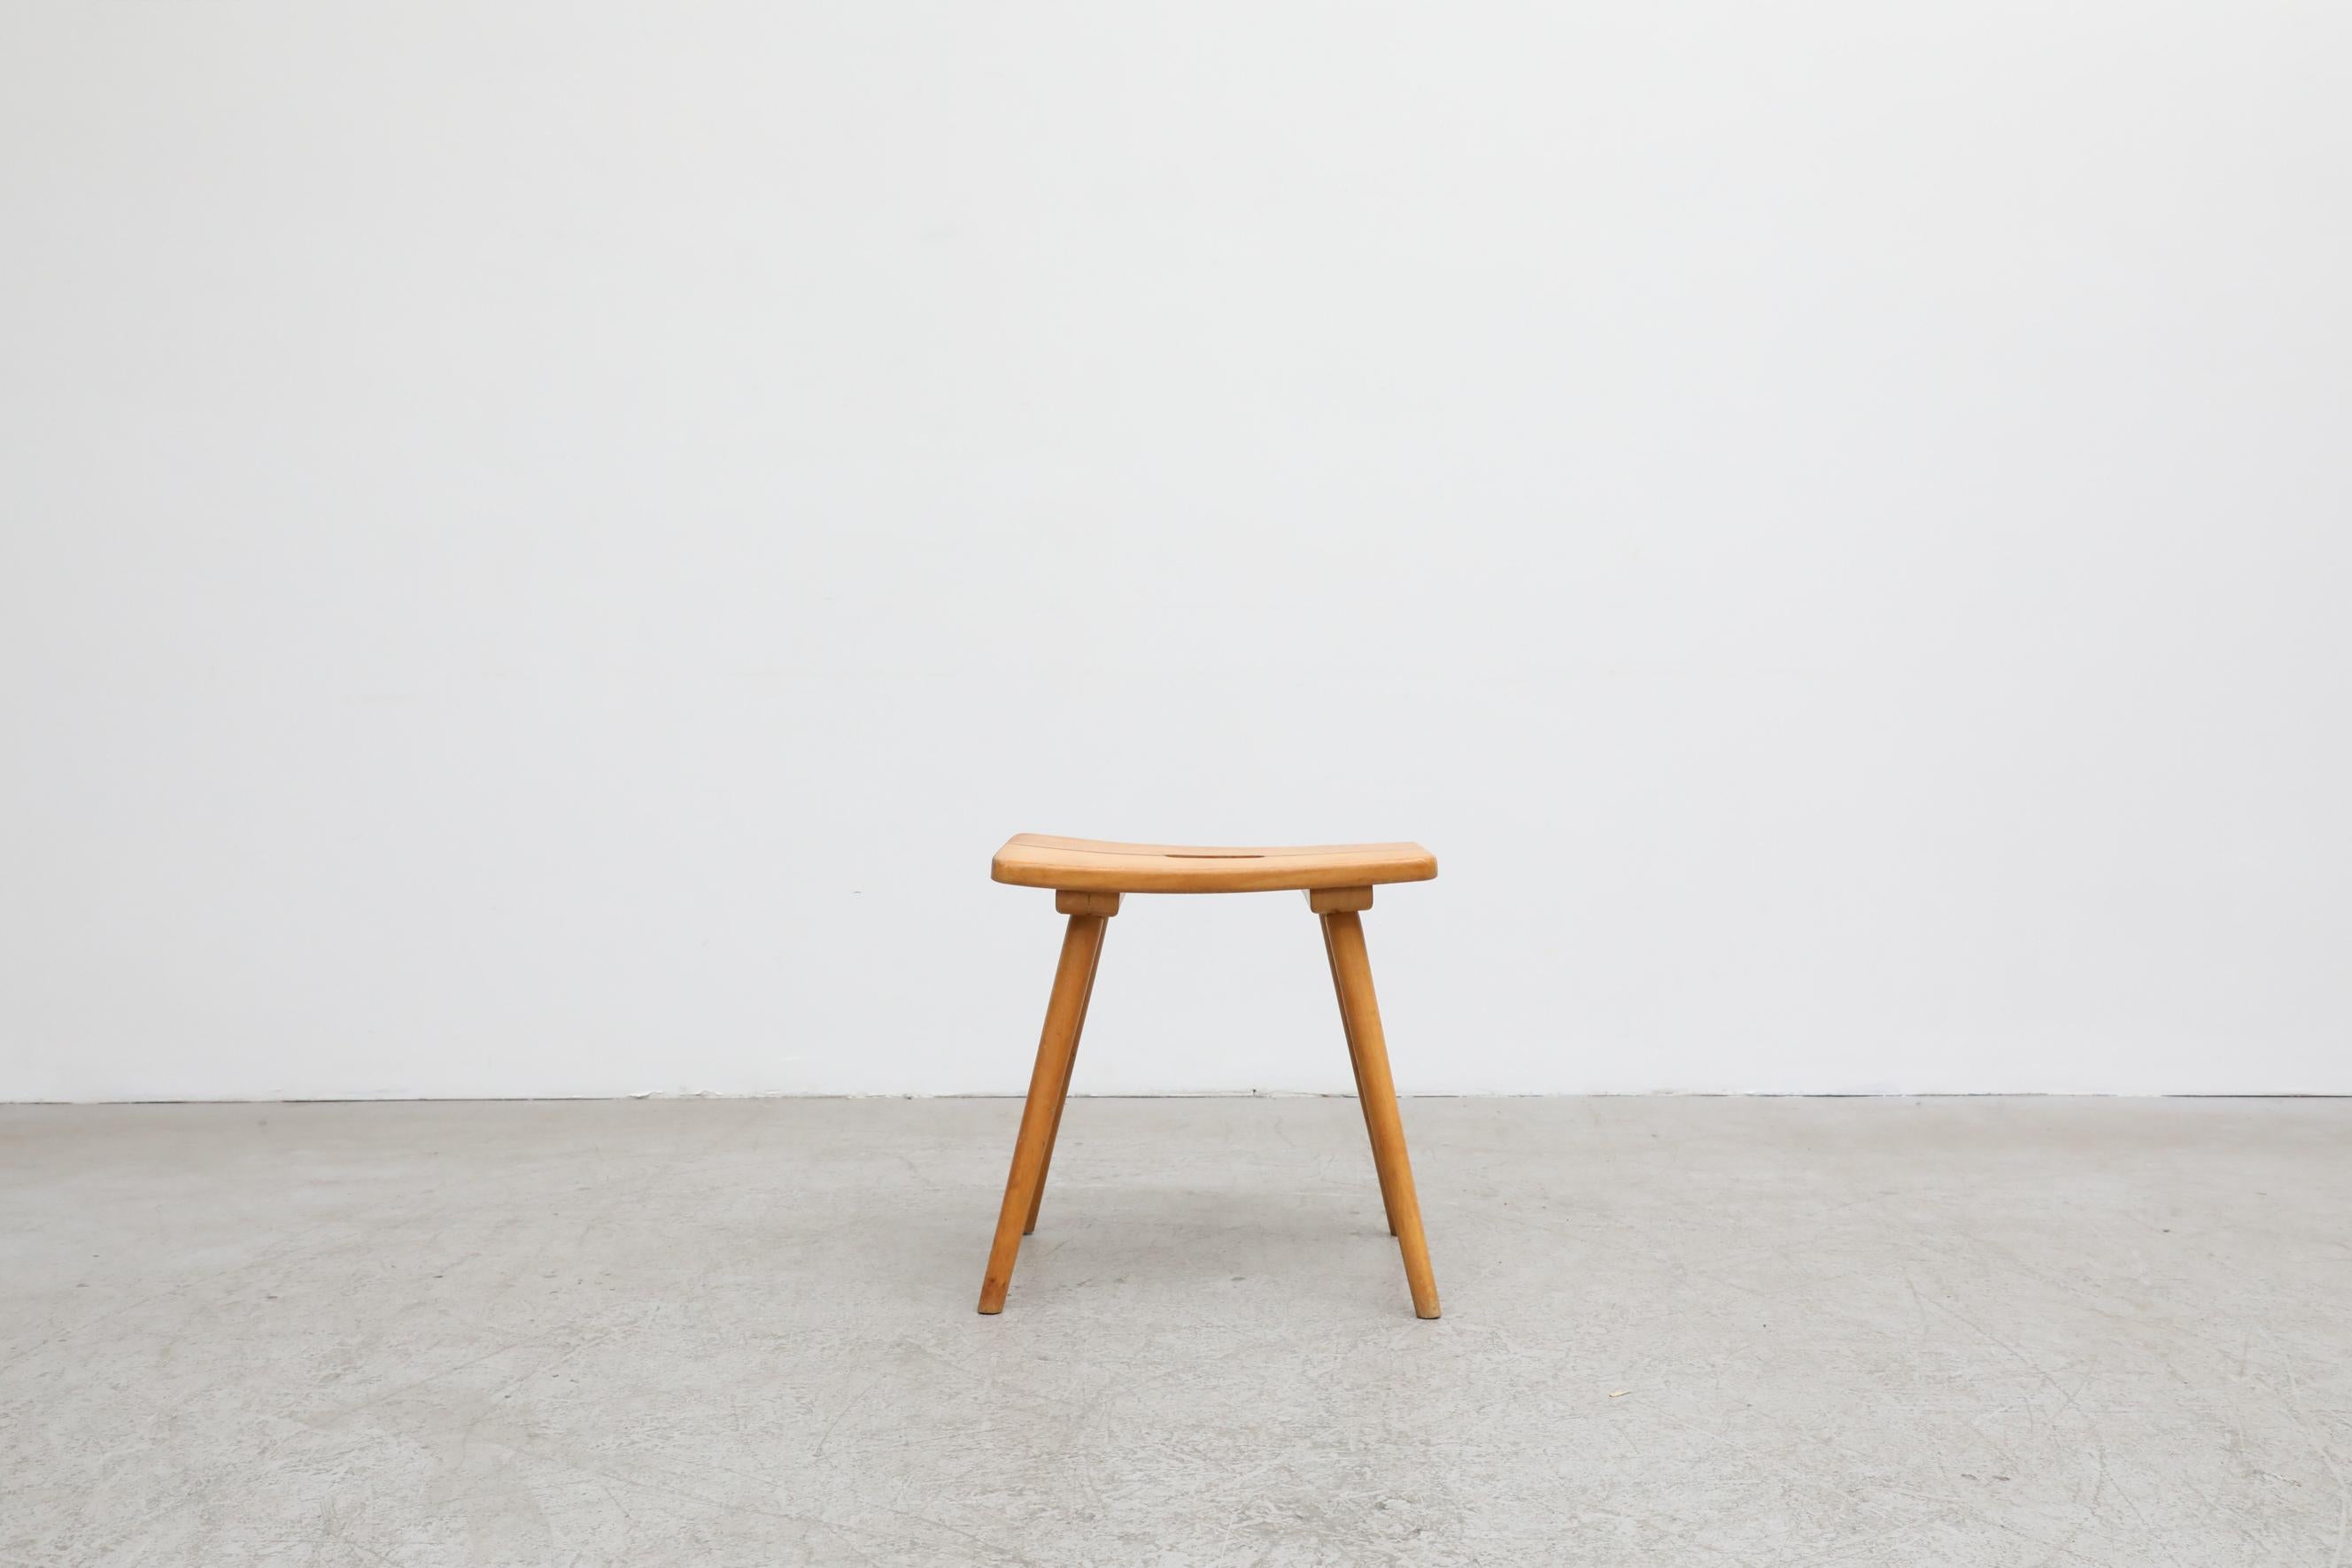 Jacob Muller For Wohnhilfe maple stool with cut-out top. In original condition with visible wear consistent with its age and use.